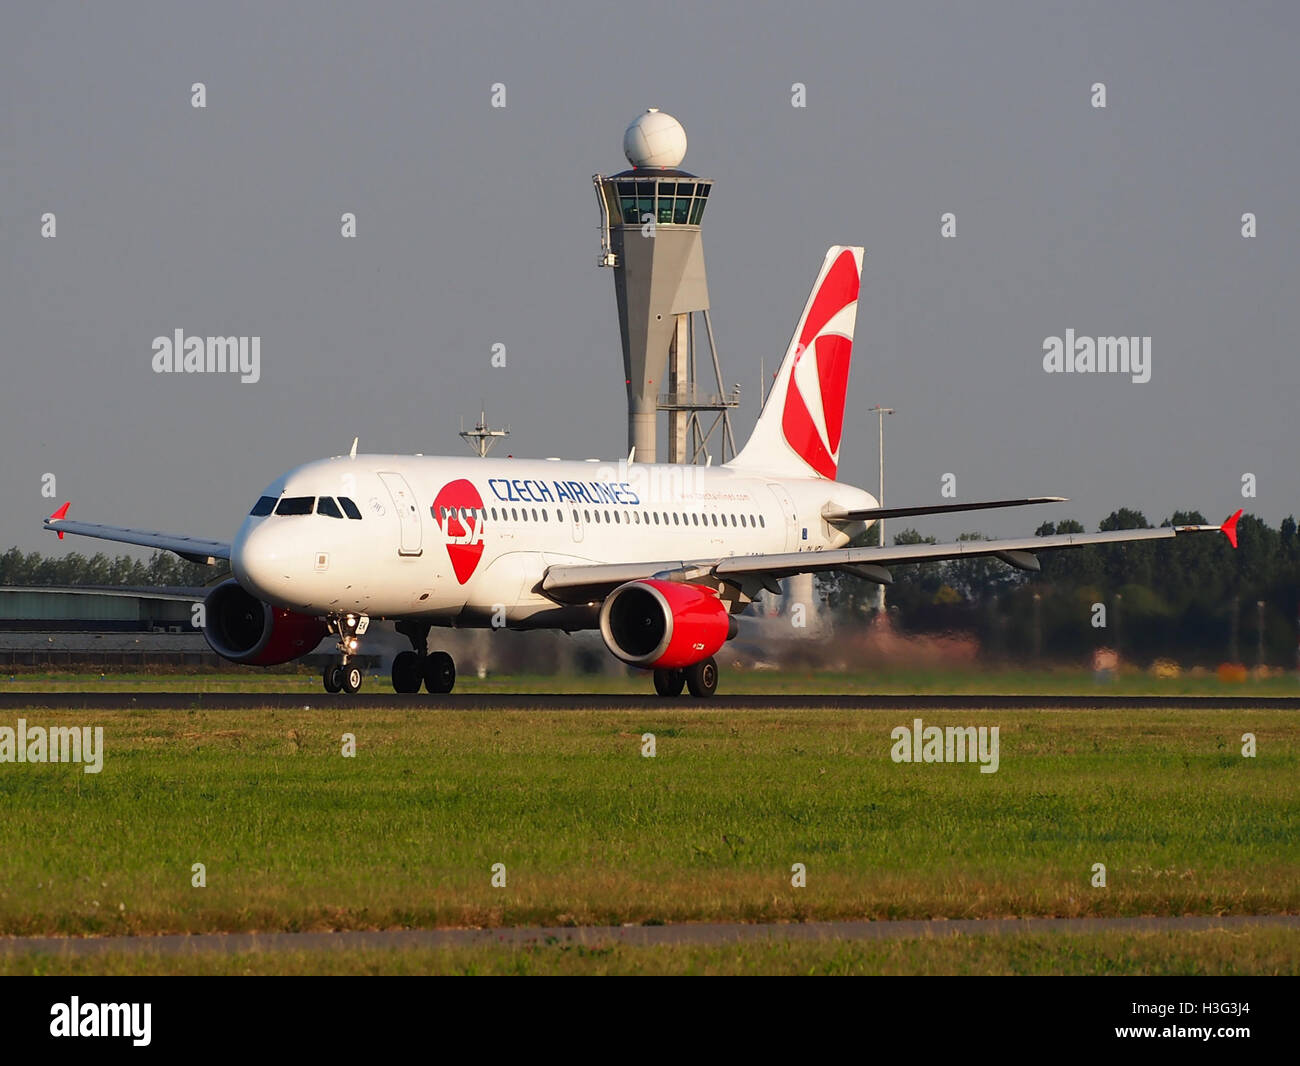 OK-MEK Czech Airlines (CSA) Airbus A319-112 - cn 3043 takeoff from Schiphol pic1 Stock Photo